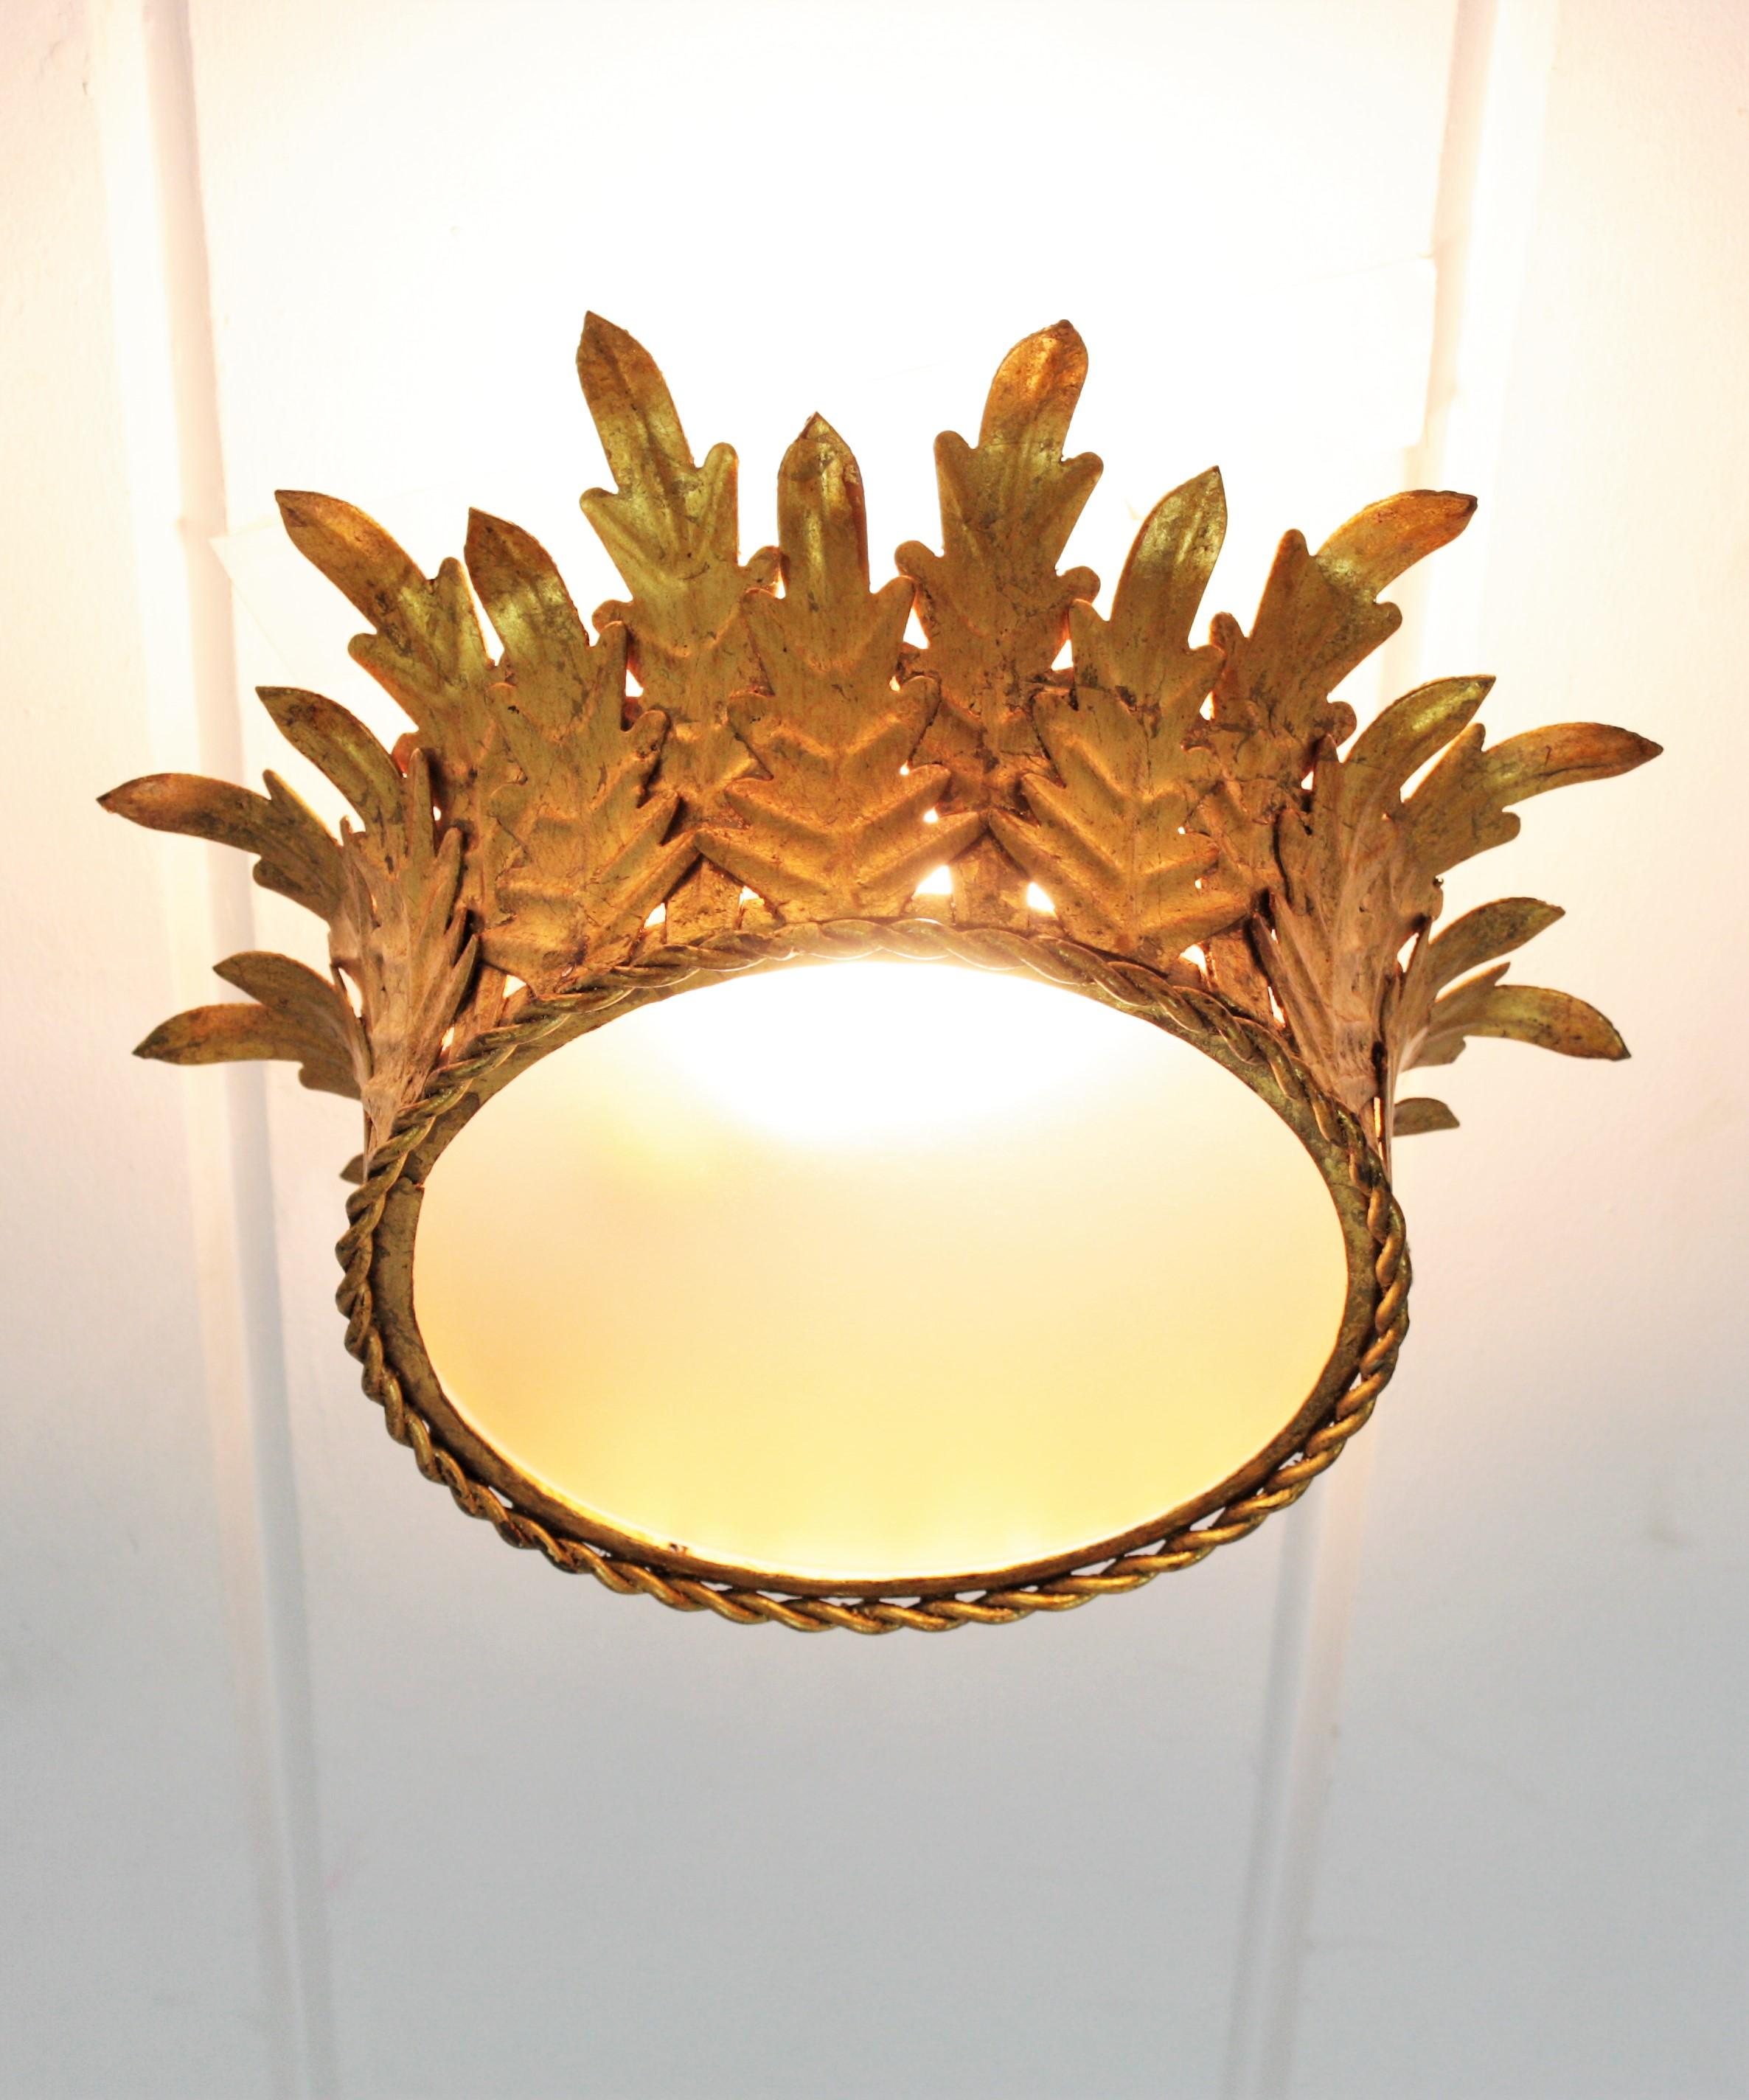 Pair of Crown Foliage Ceiling Light Fixtures in Gilt Iron and Frosted Glass 9